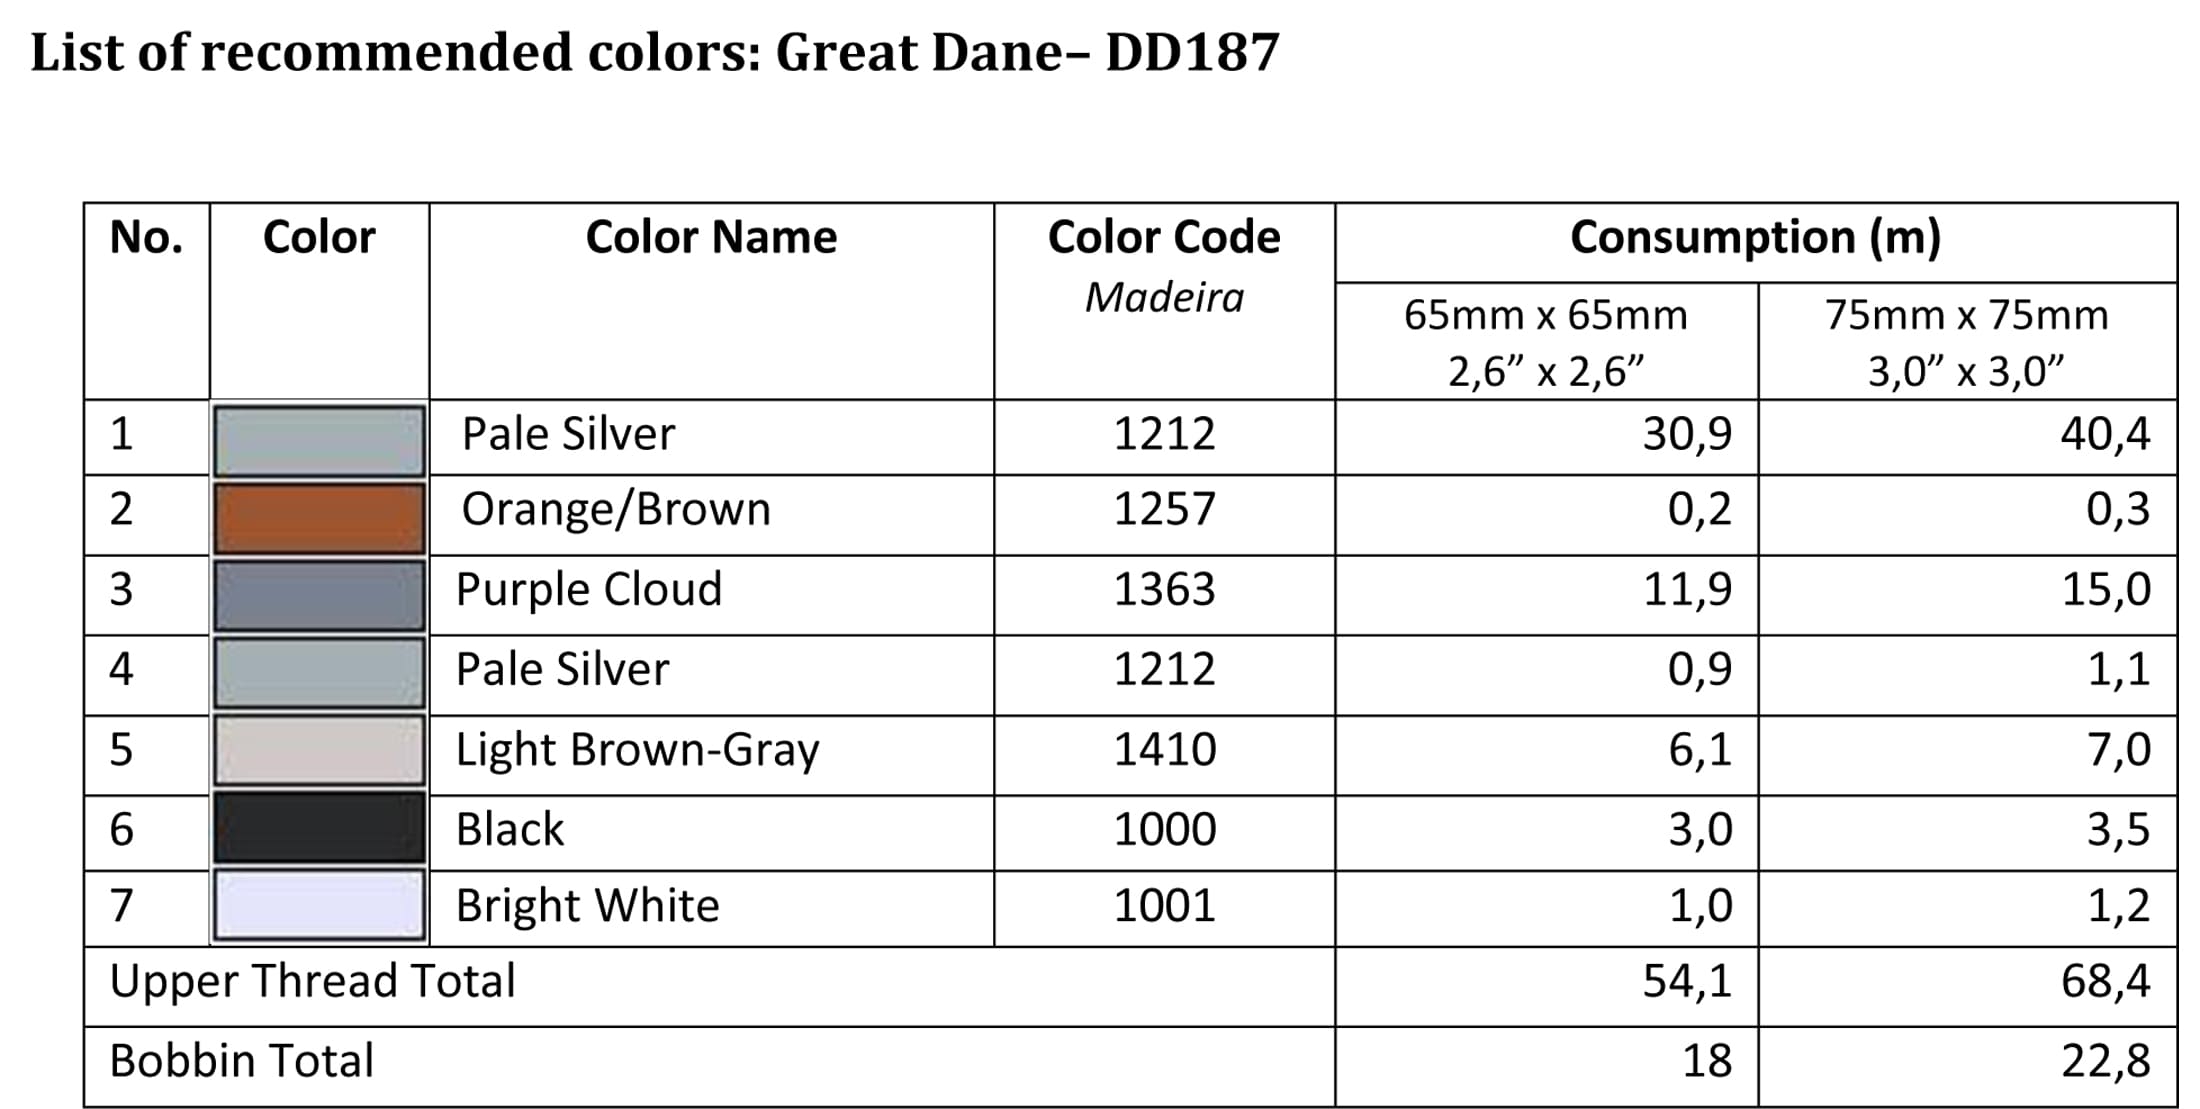 List of recommended colors - DD187